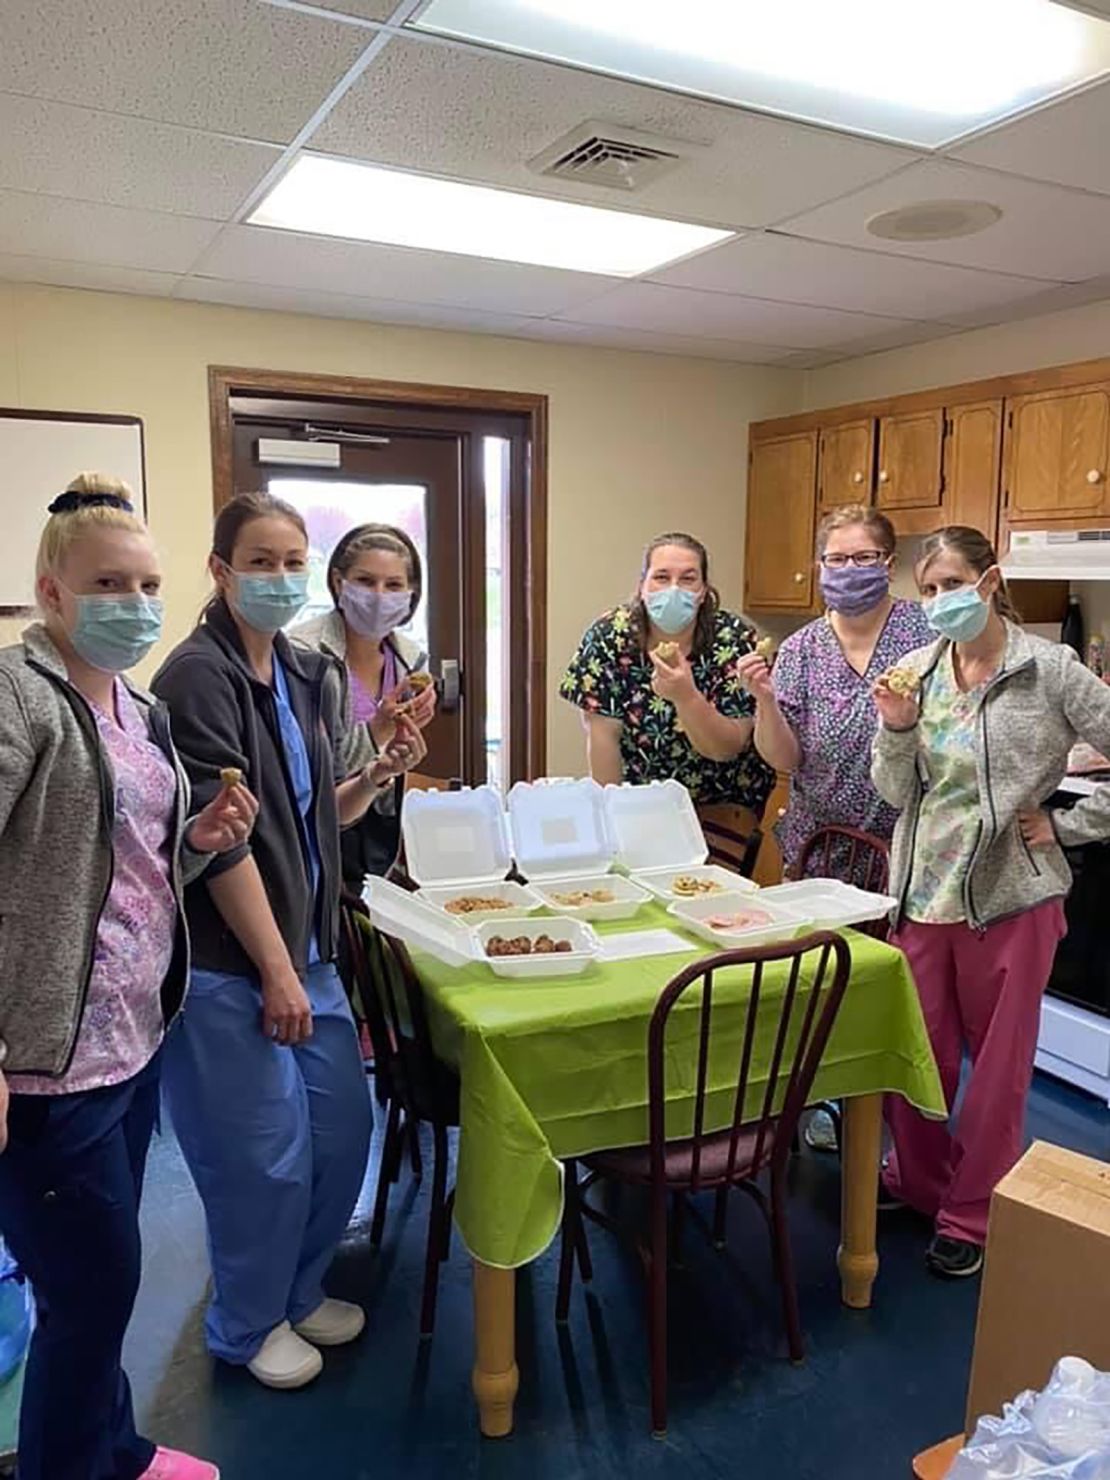 Health care workers at the University of Pittsburgh Medical Center's Children's Community Pediatrics clinic in Huntingdon.